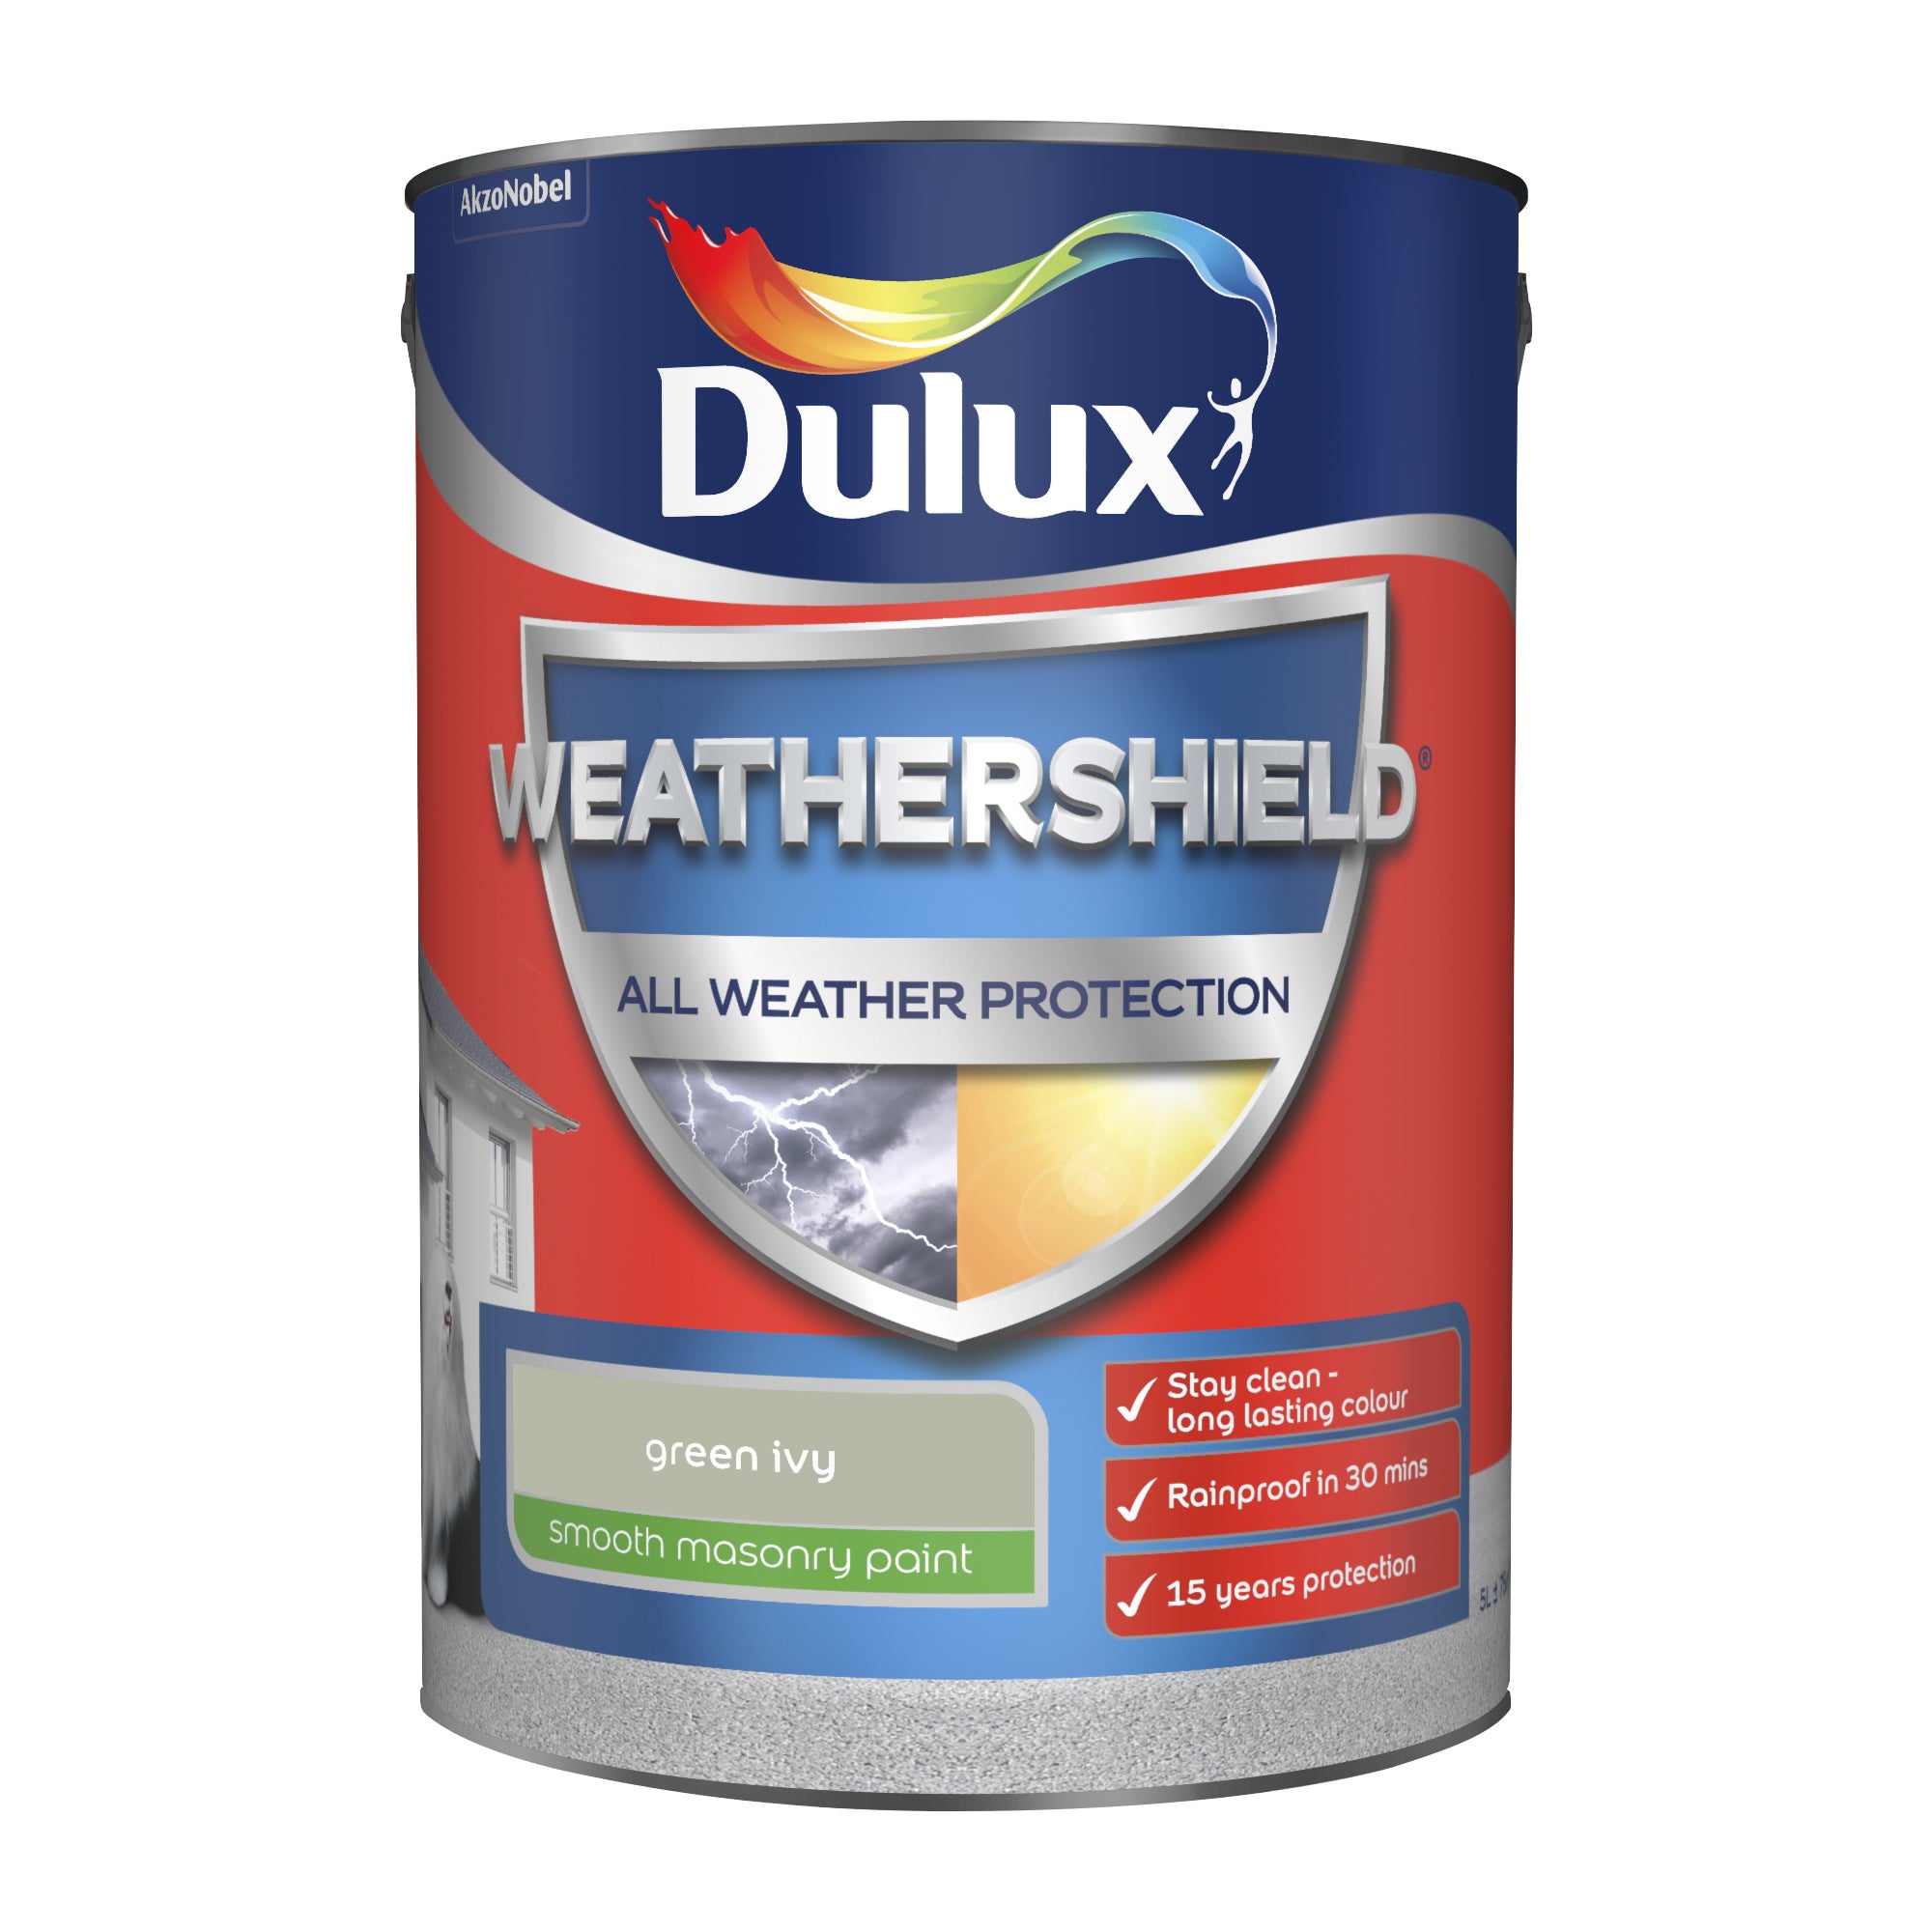 Dulux Weathershield All Weather Protection Smooth Green Ivy 5L